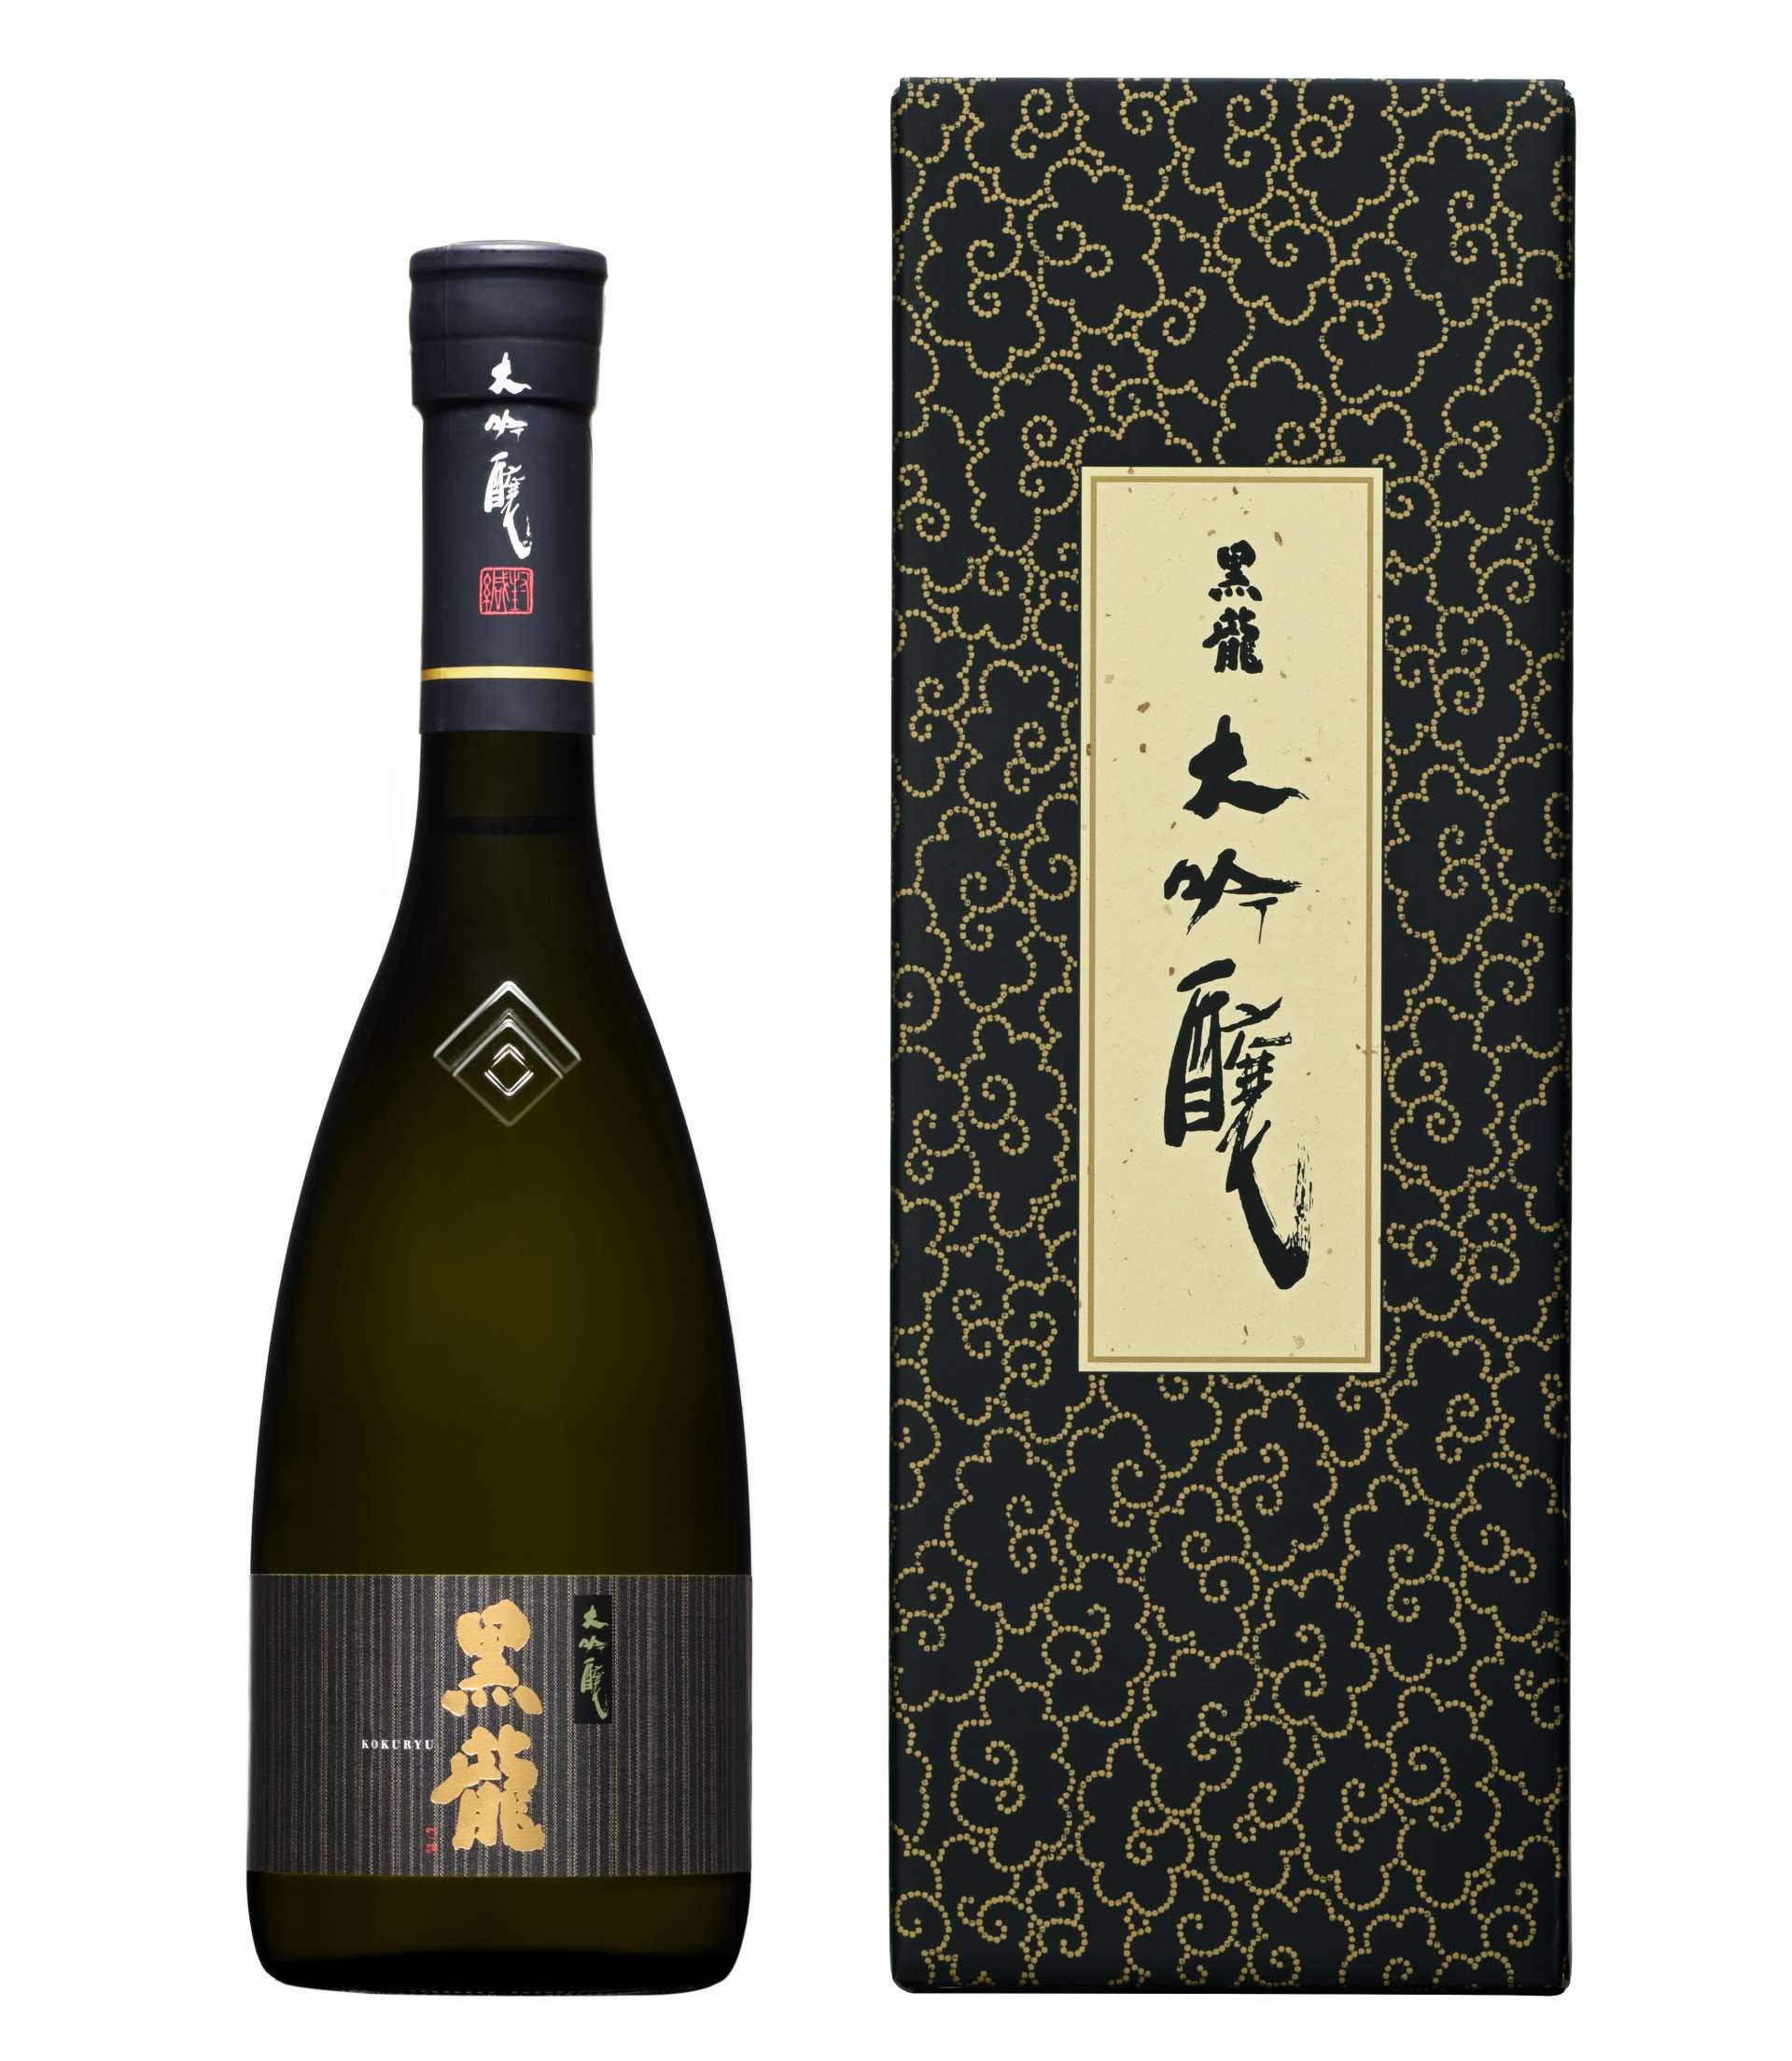 The quintessential "Kokuryu Daiginjo" is characterized by its supple taste and fine finish.